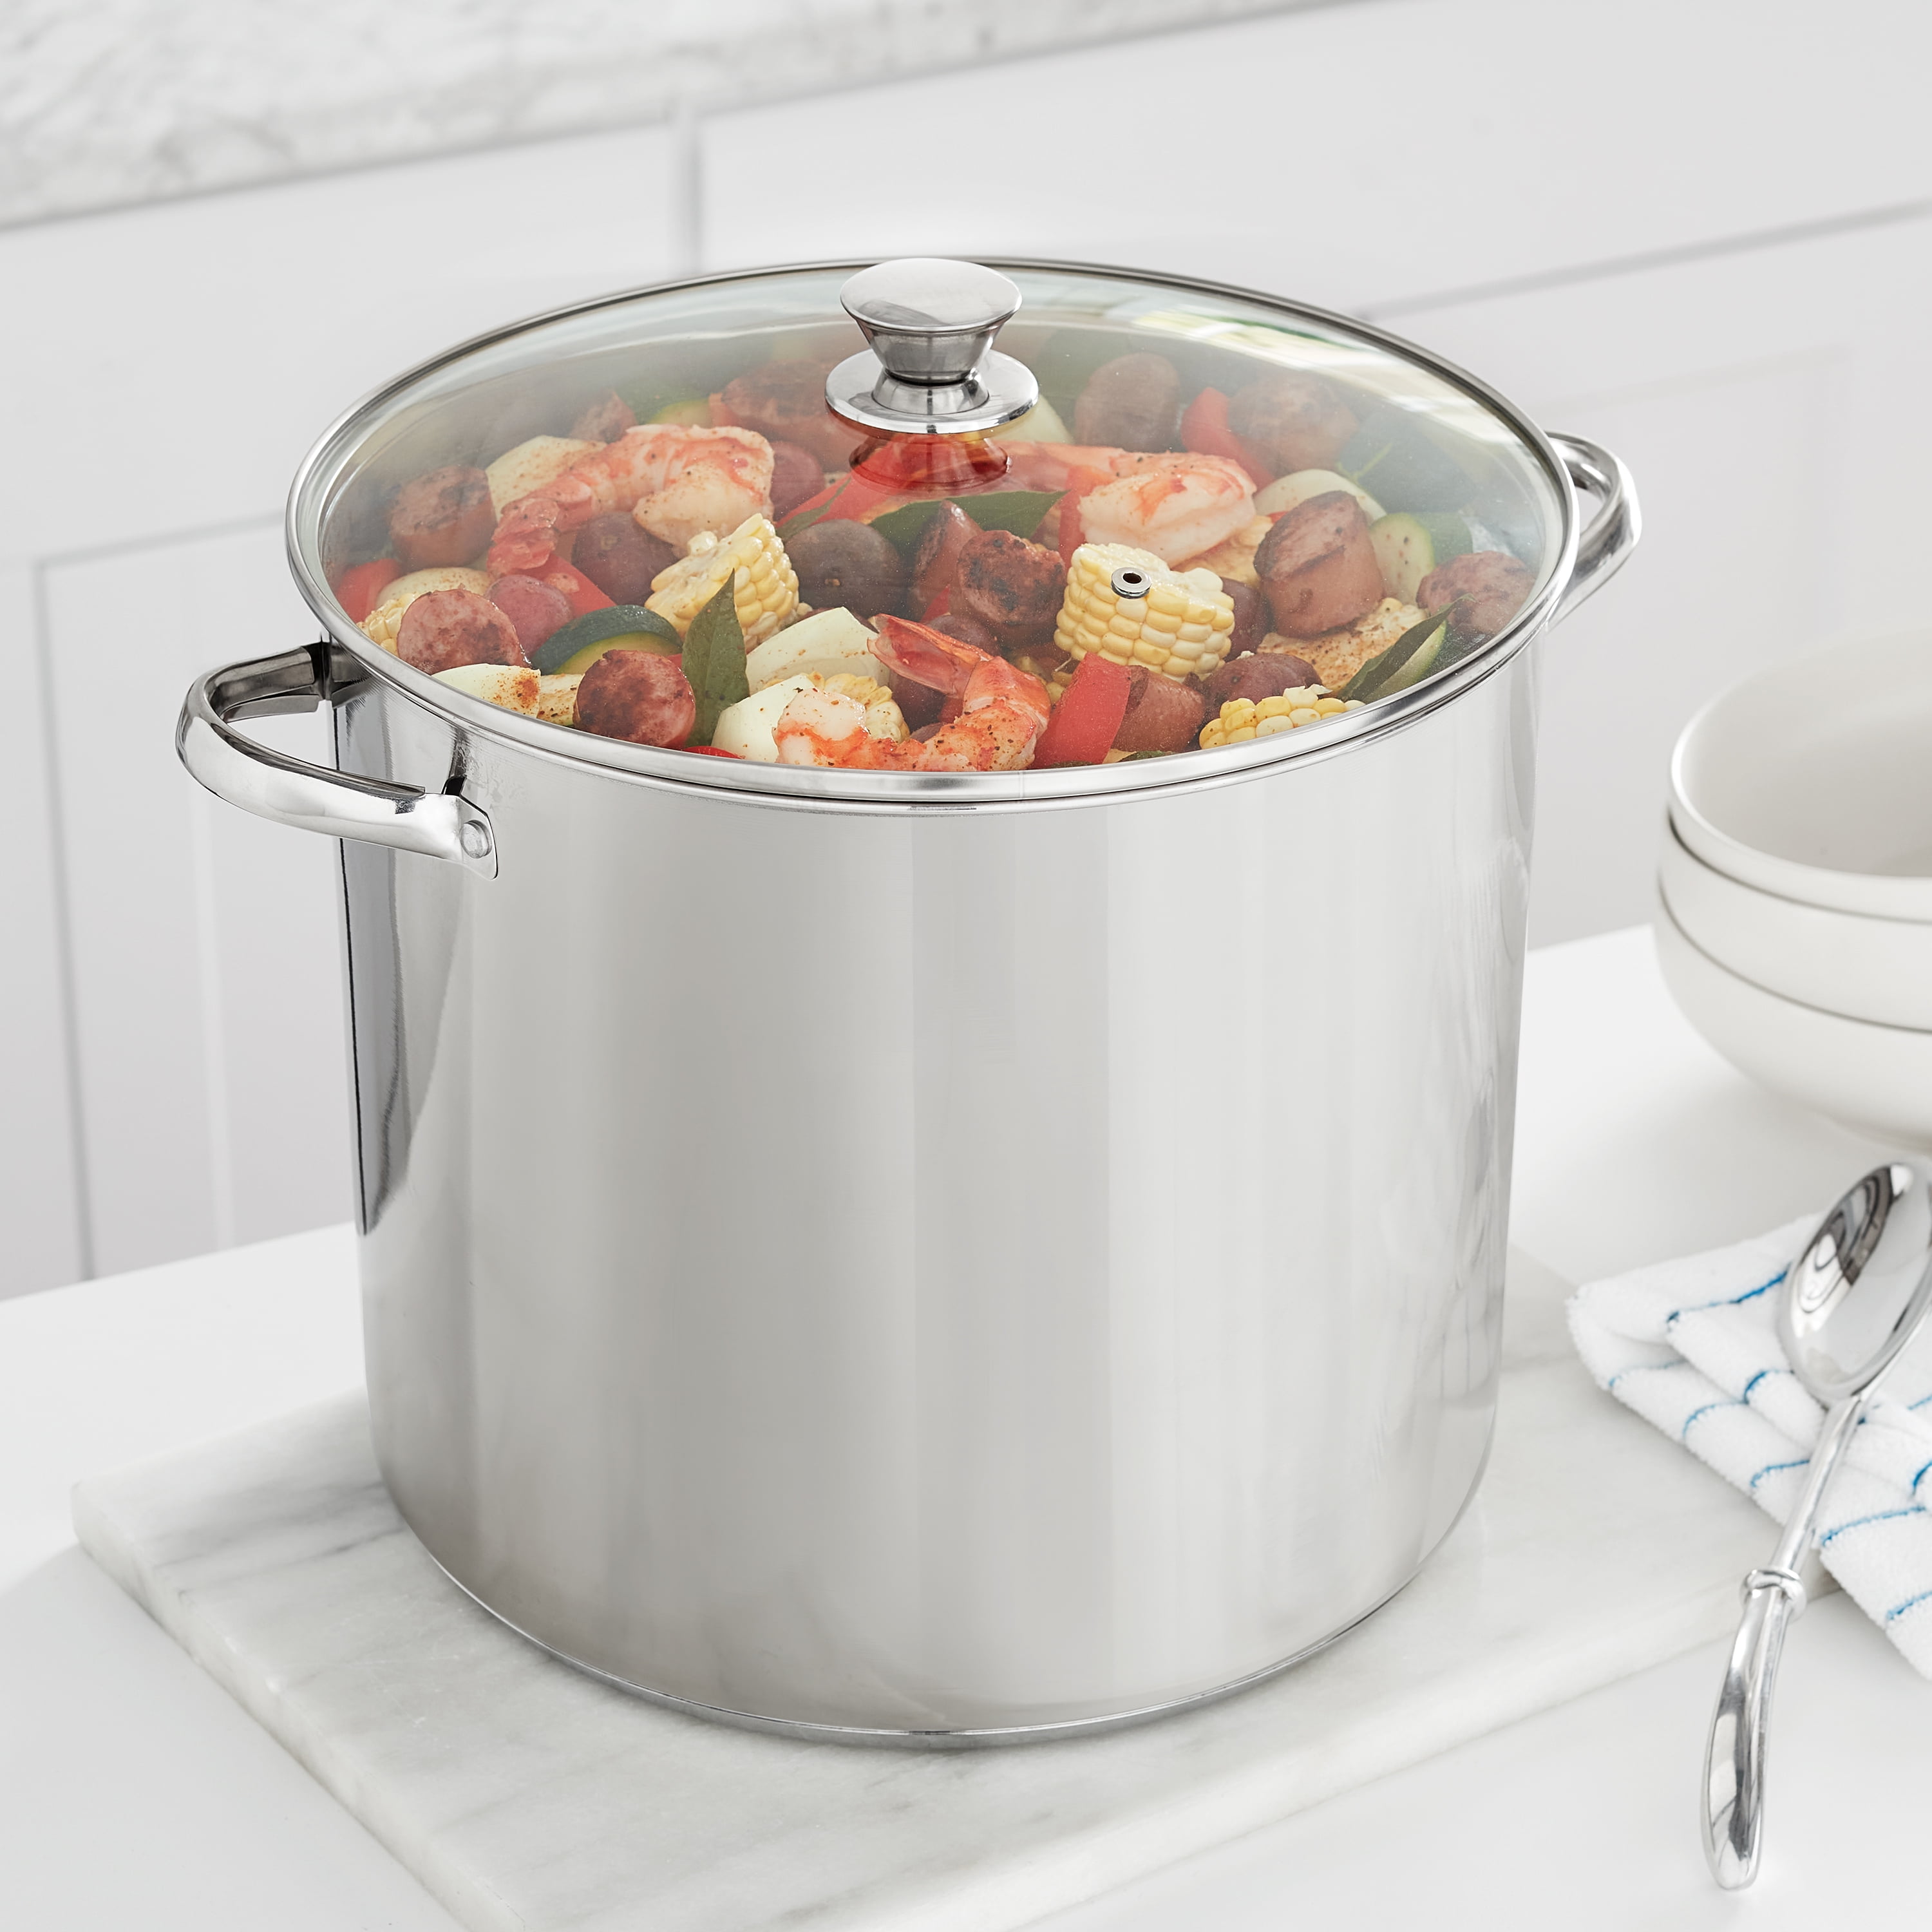 Polished Stainless Steel 220l/240qt Stock Pot D24H32